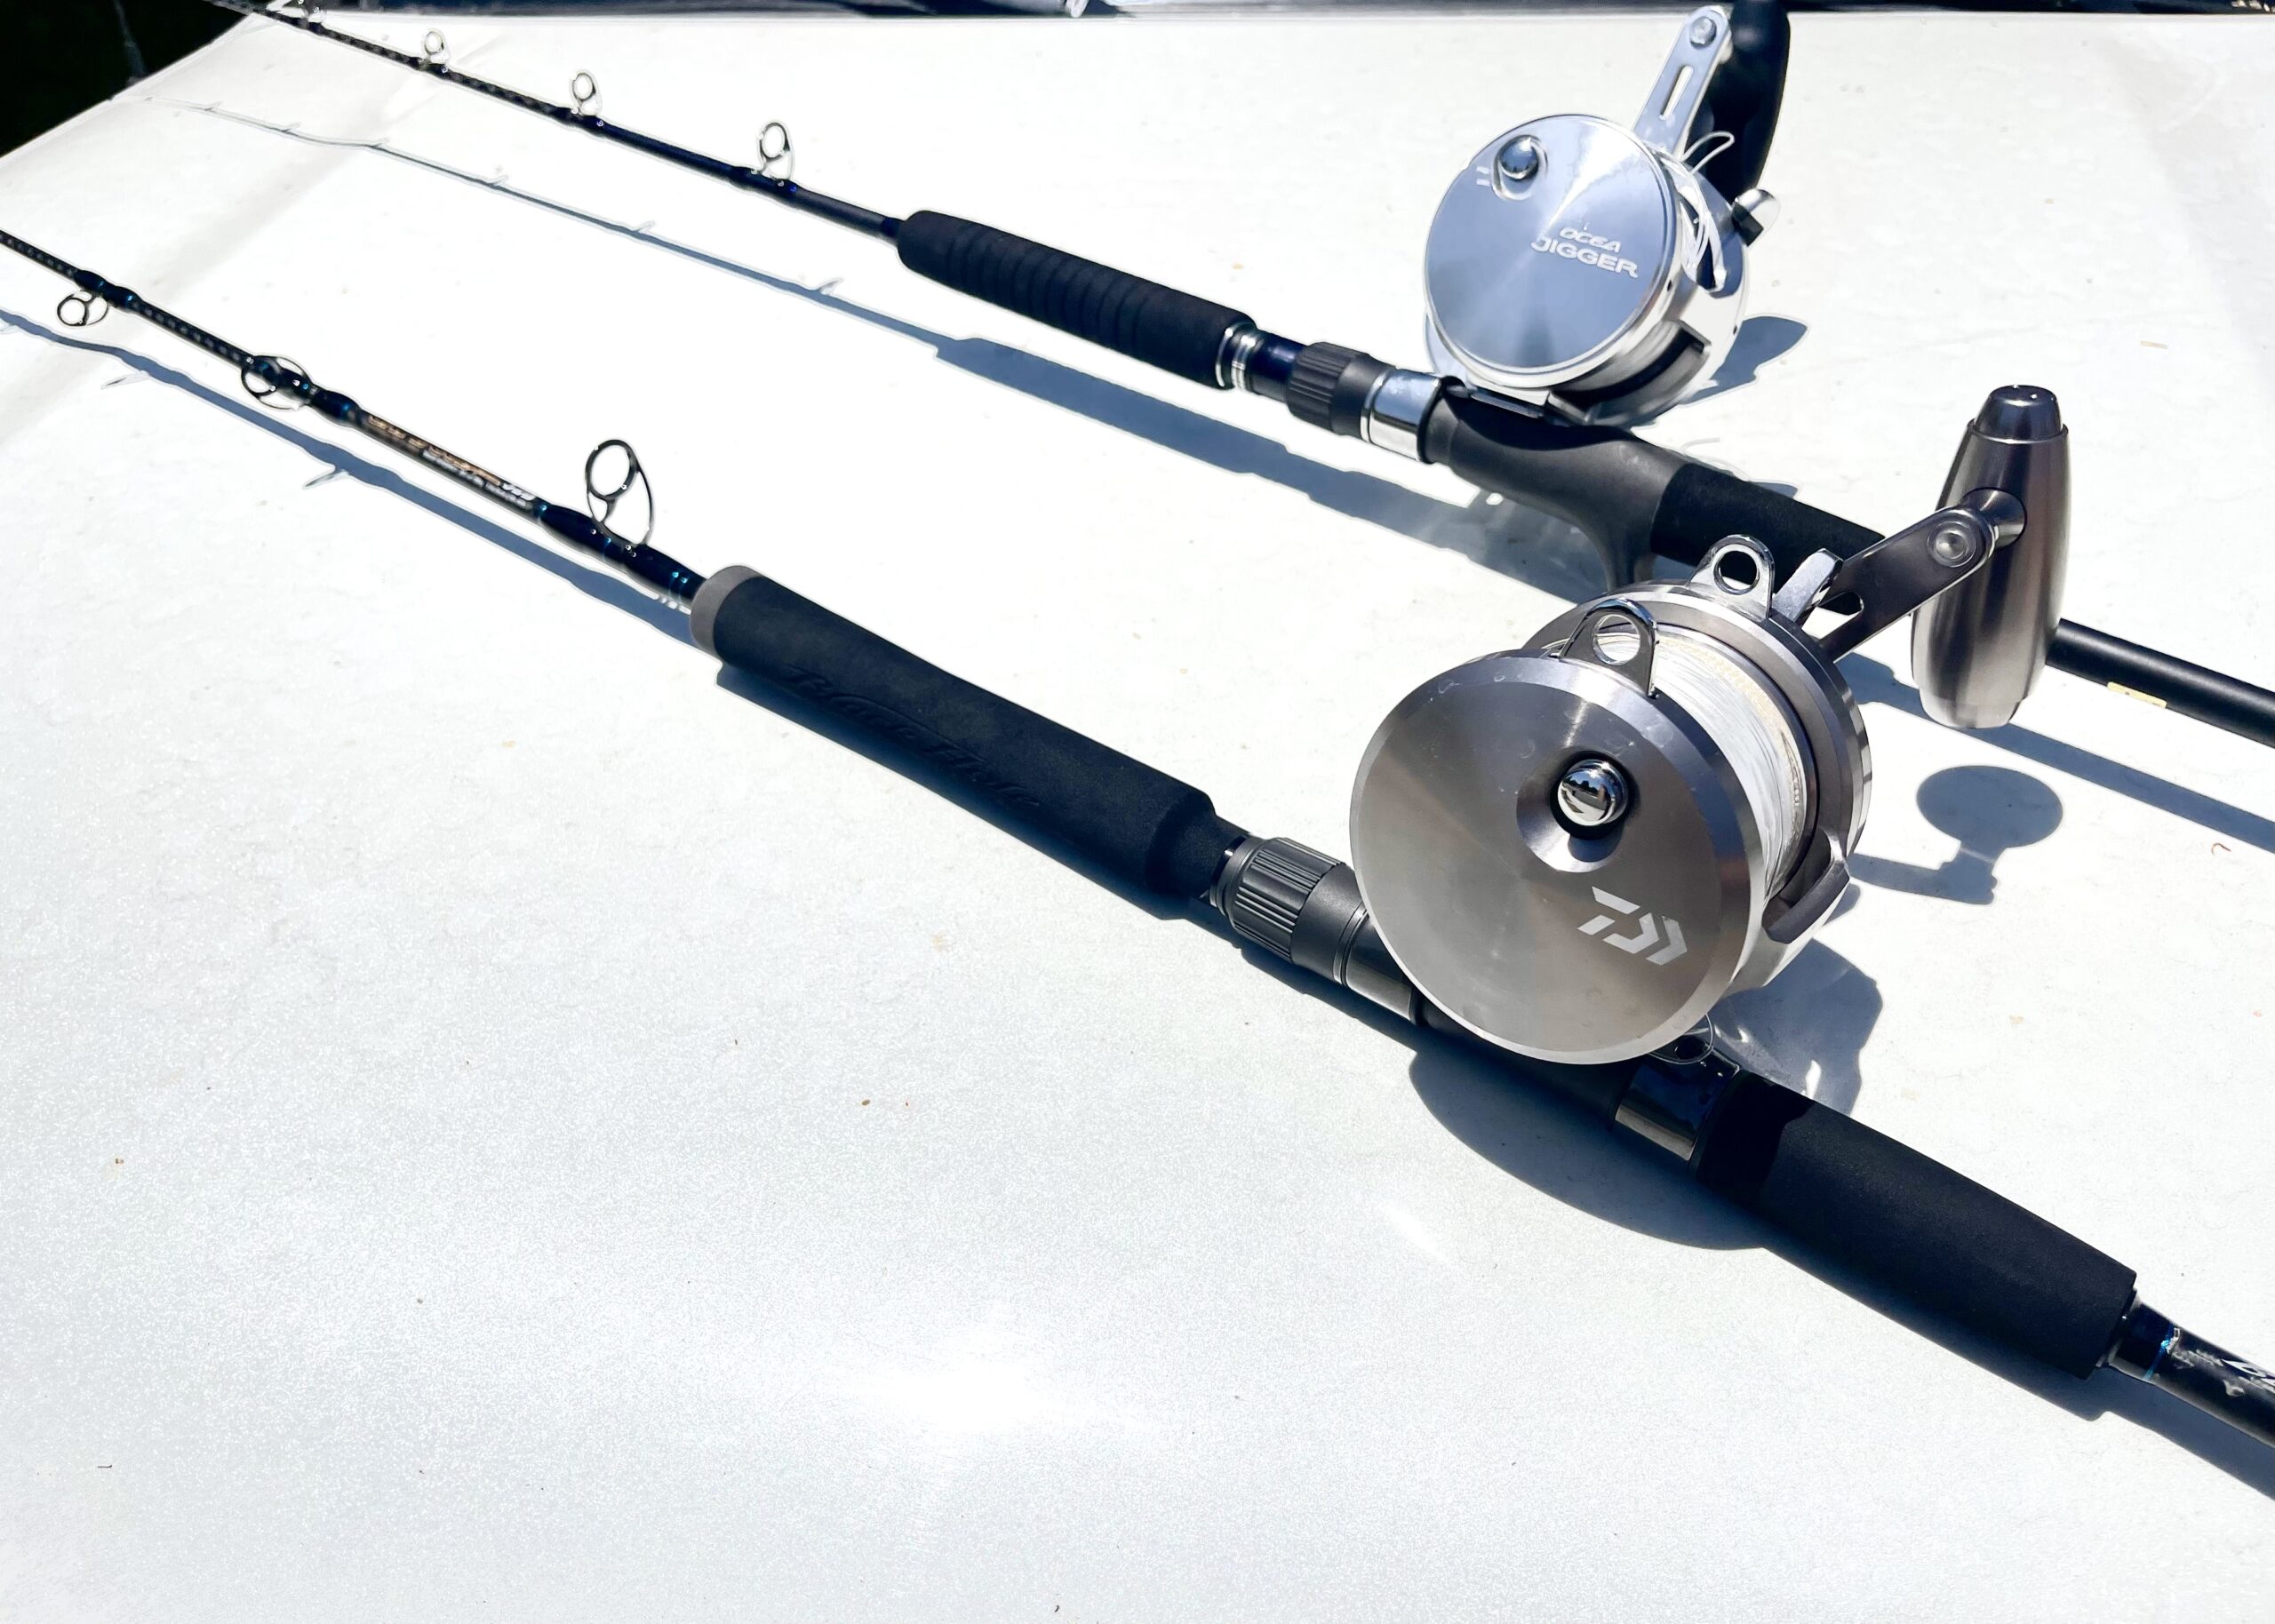 The Best Tuna Jigging Rods and Reels for Offhore Boat Anglers